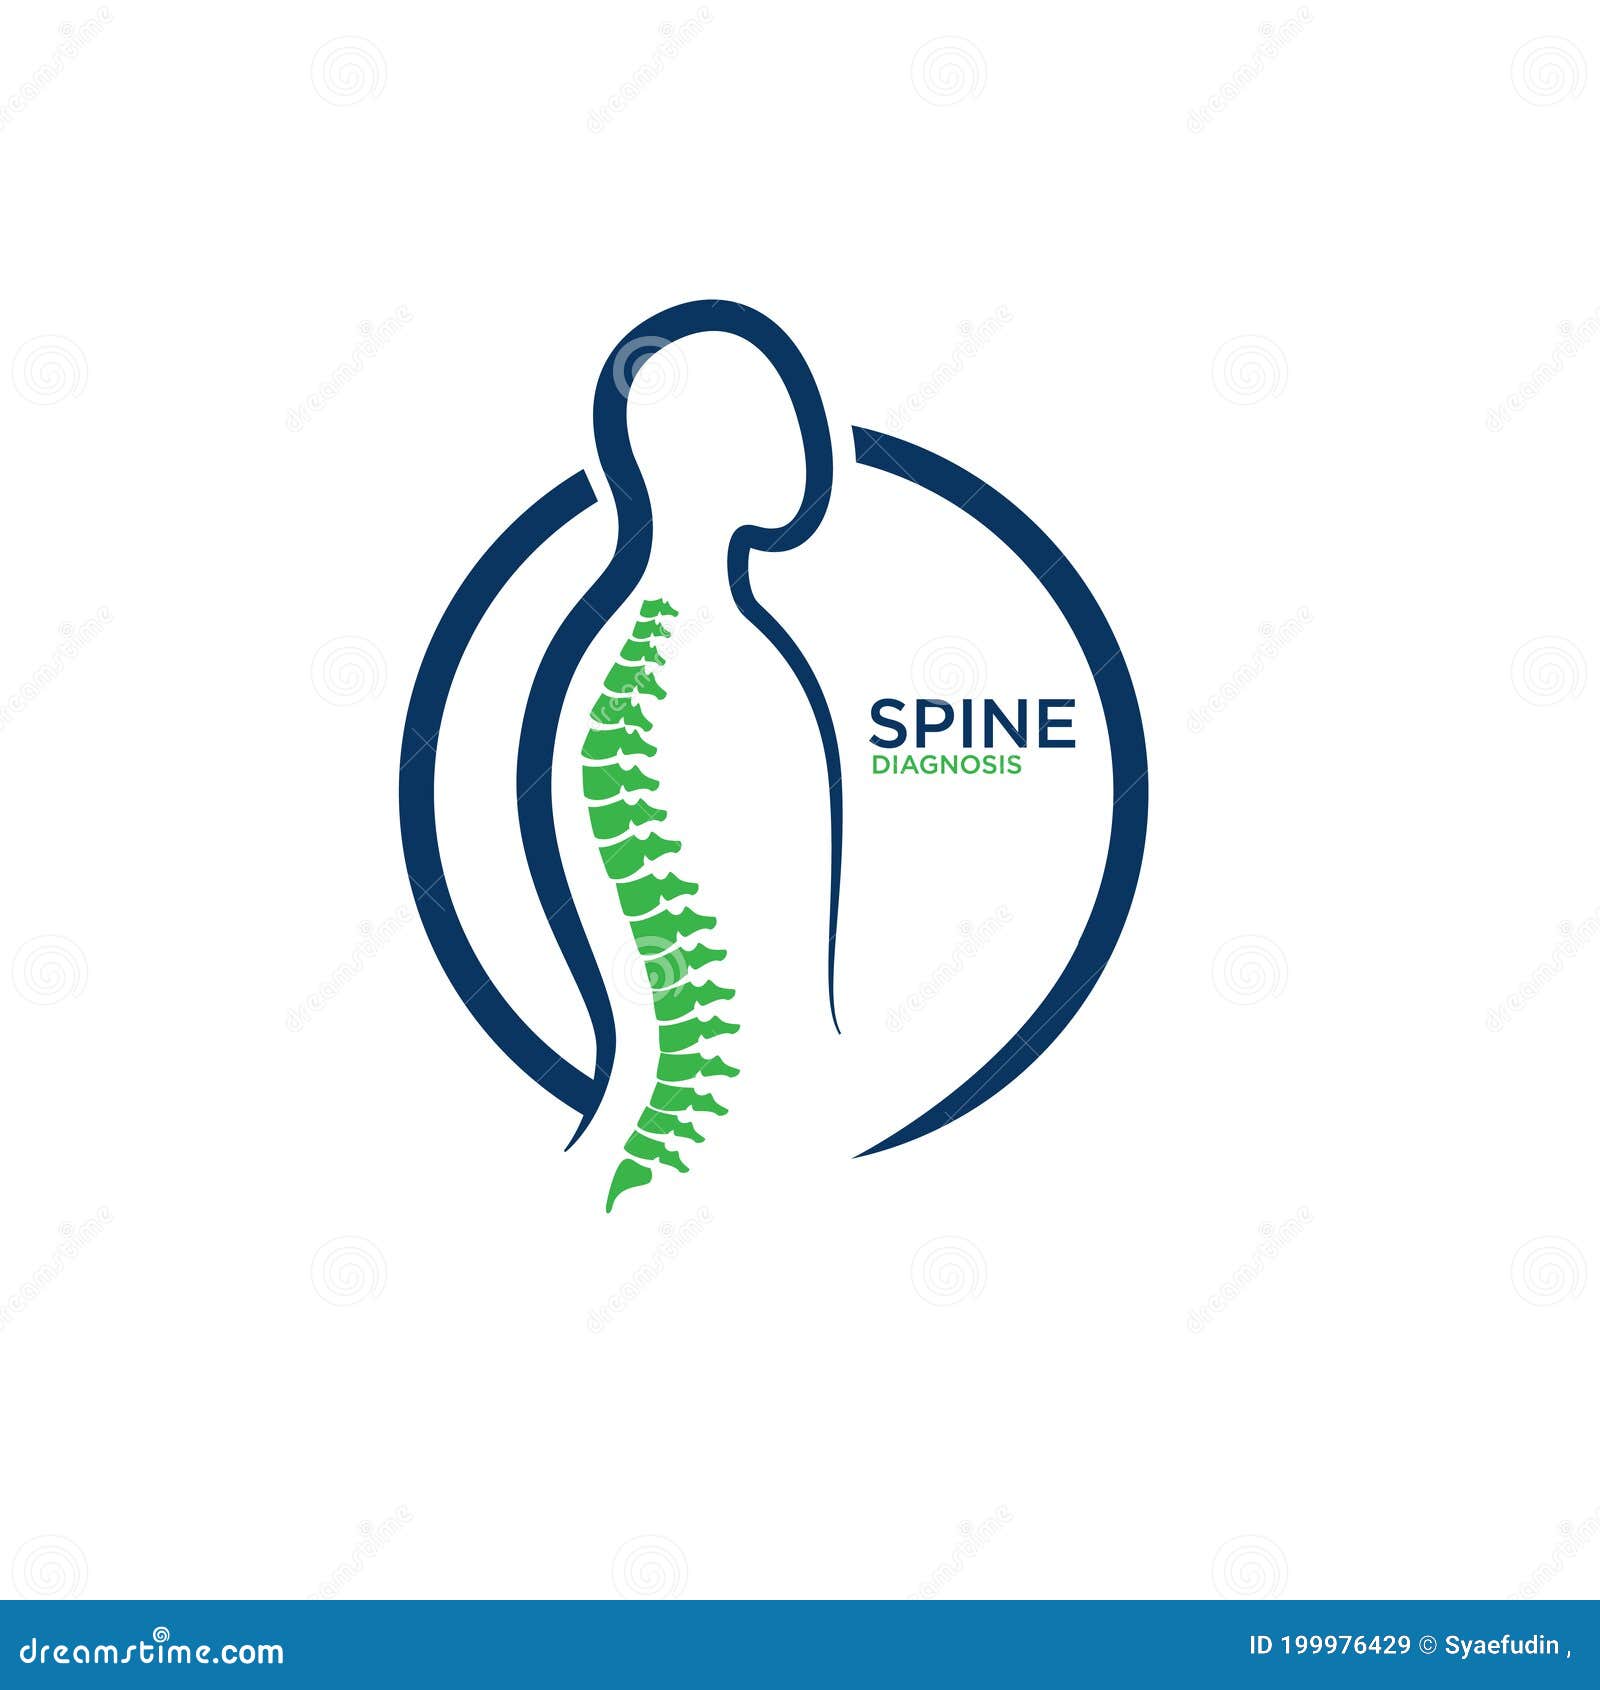 Spine Logo Designs Simple Modern for Medical Check and Company Stock Vector  - Illustration of hospitality, nature: 199976429